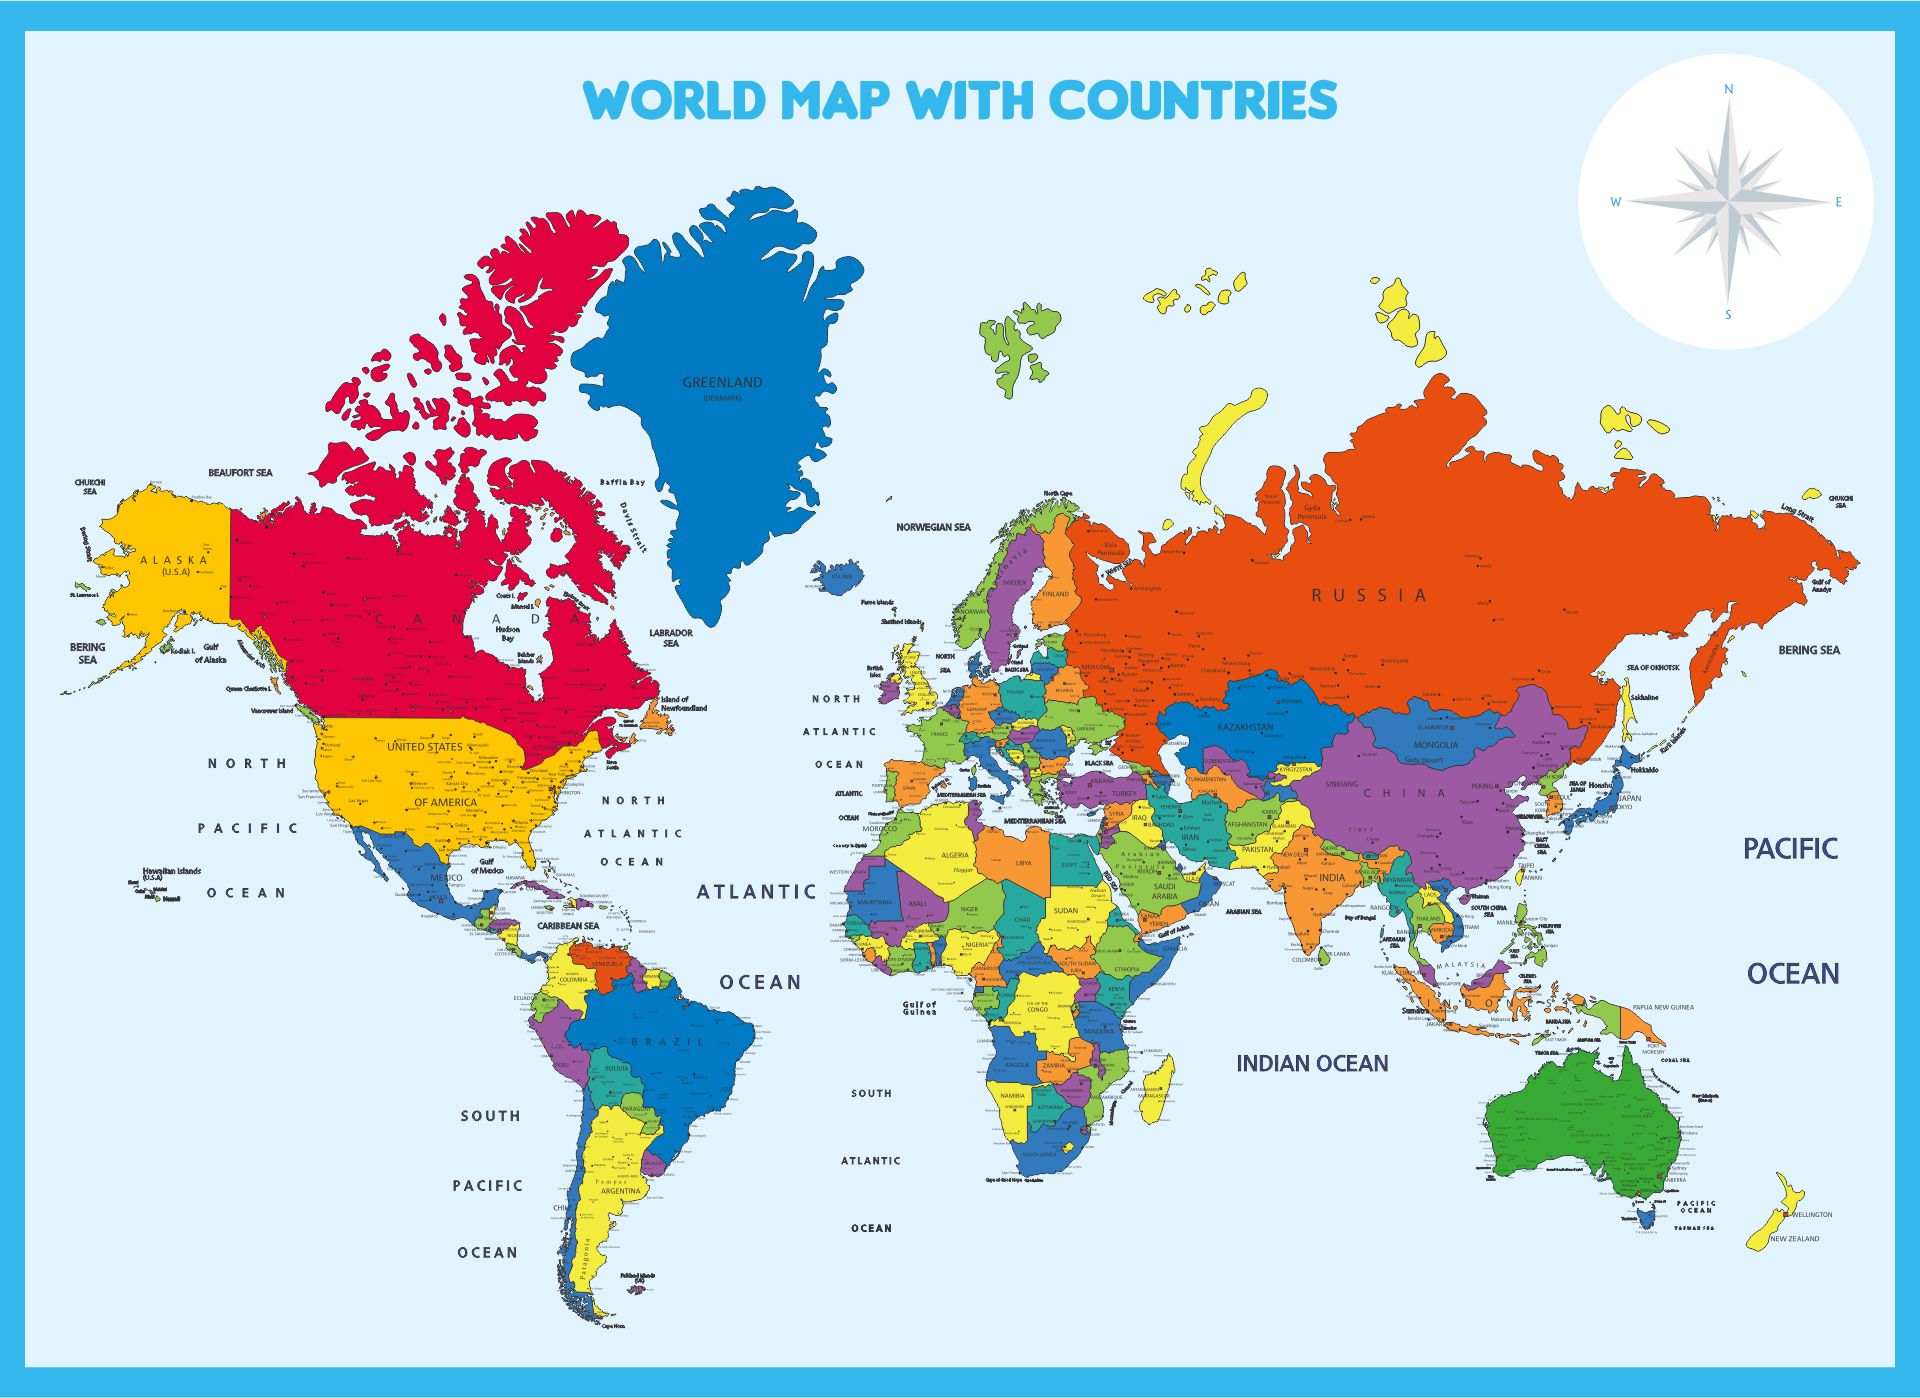 7 Best Images of World Map Printable A4 Size - World Map Printable ...